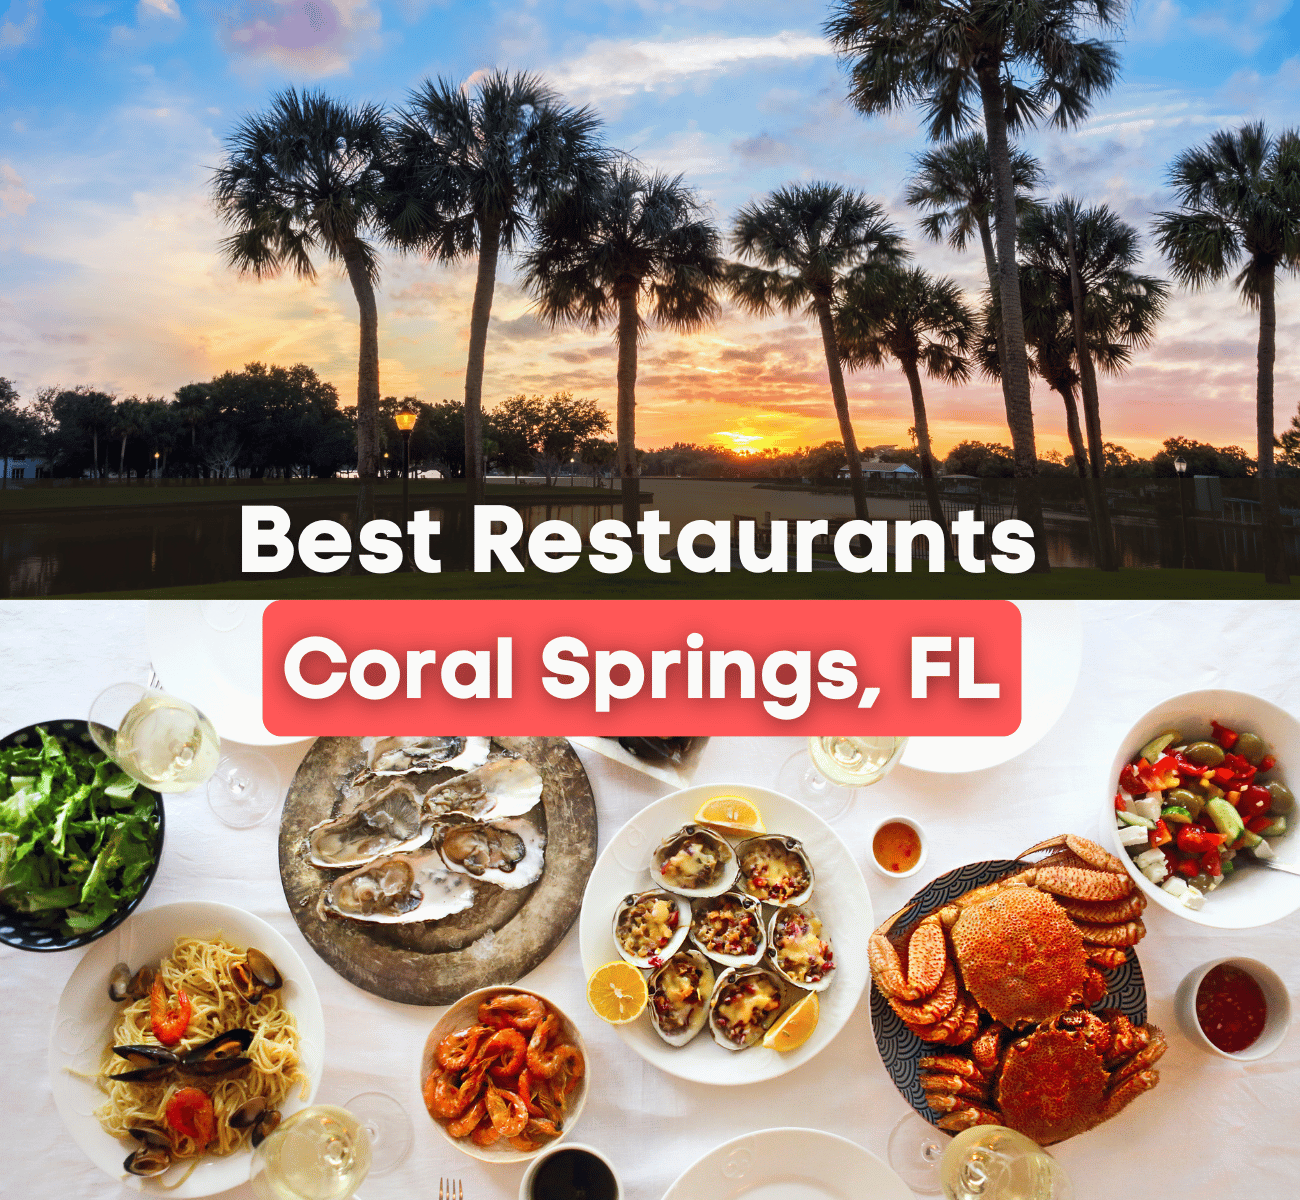 best restaurants in Coral Springs, FL graphic with palm trees and spread of food